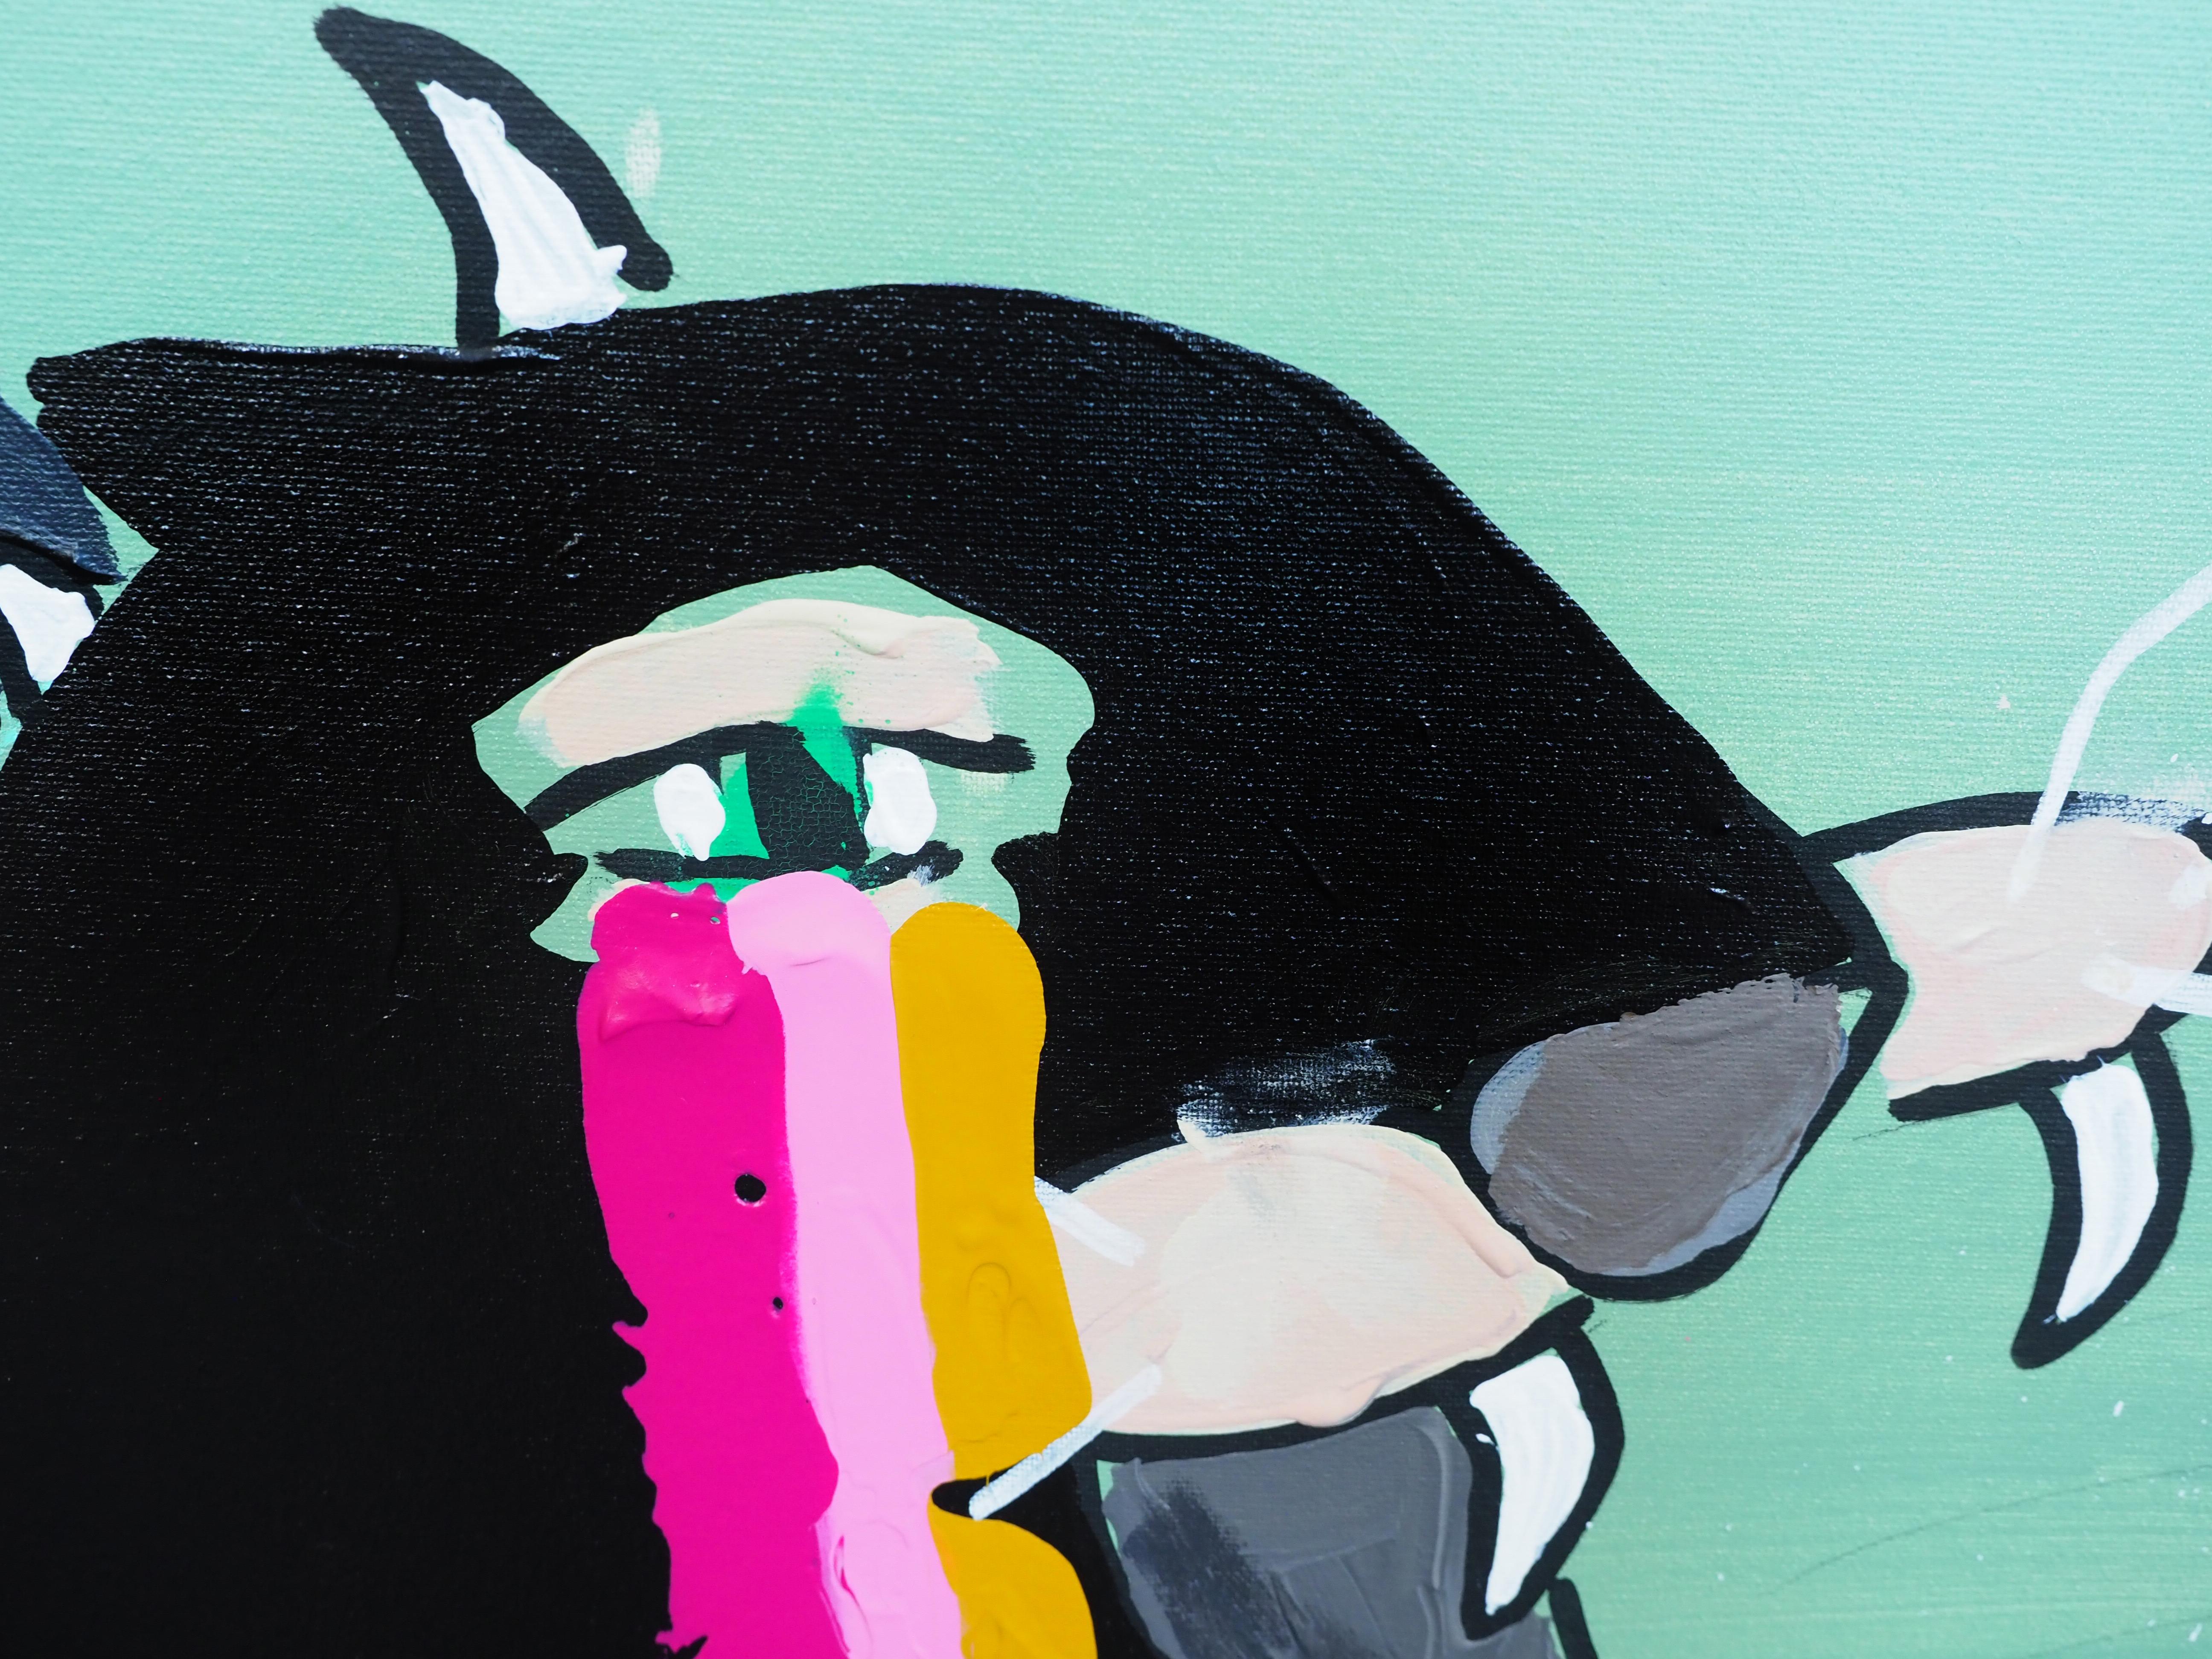 Two Panthers displays a minimalistic character of a cowboy confronting two black panthers, suggesting themes of facing fear. As the bright, energetic colors portray the victory of overcoming obstacles, Brandon Jones uses bold, confident strokes to